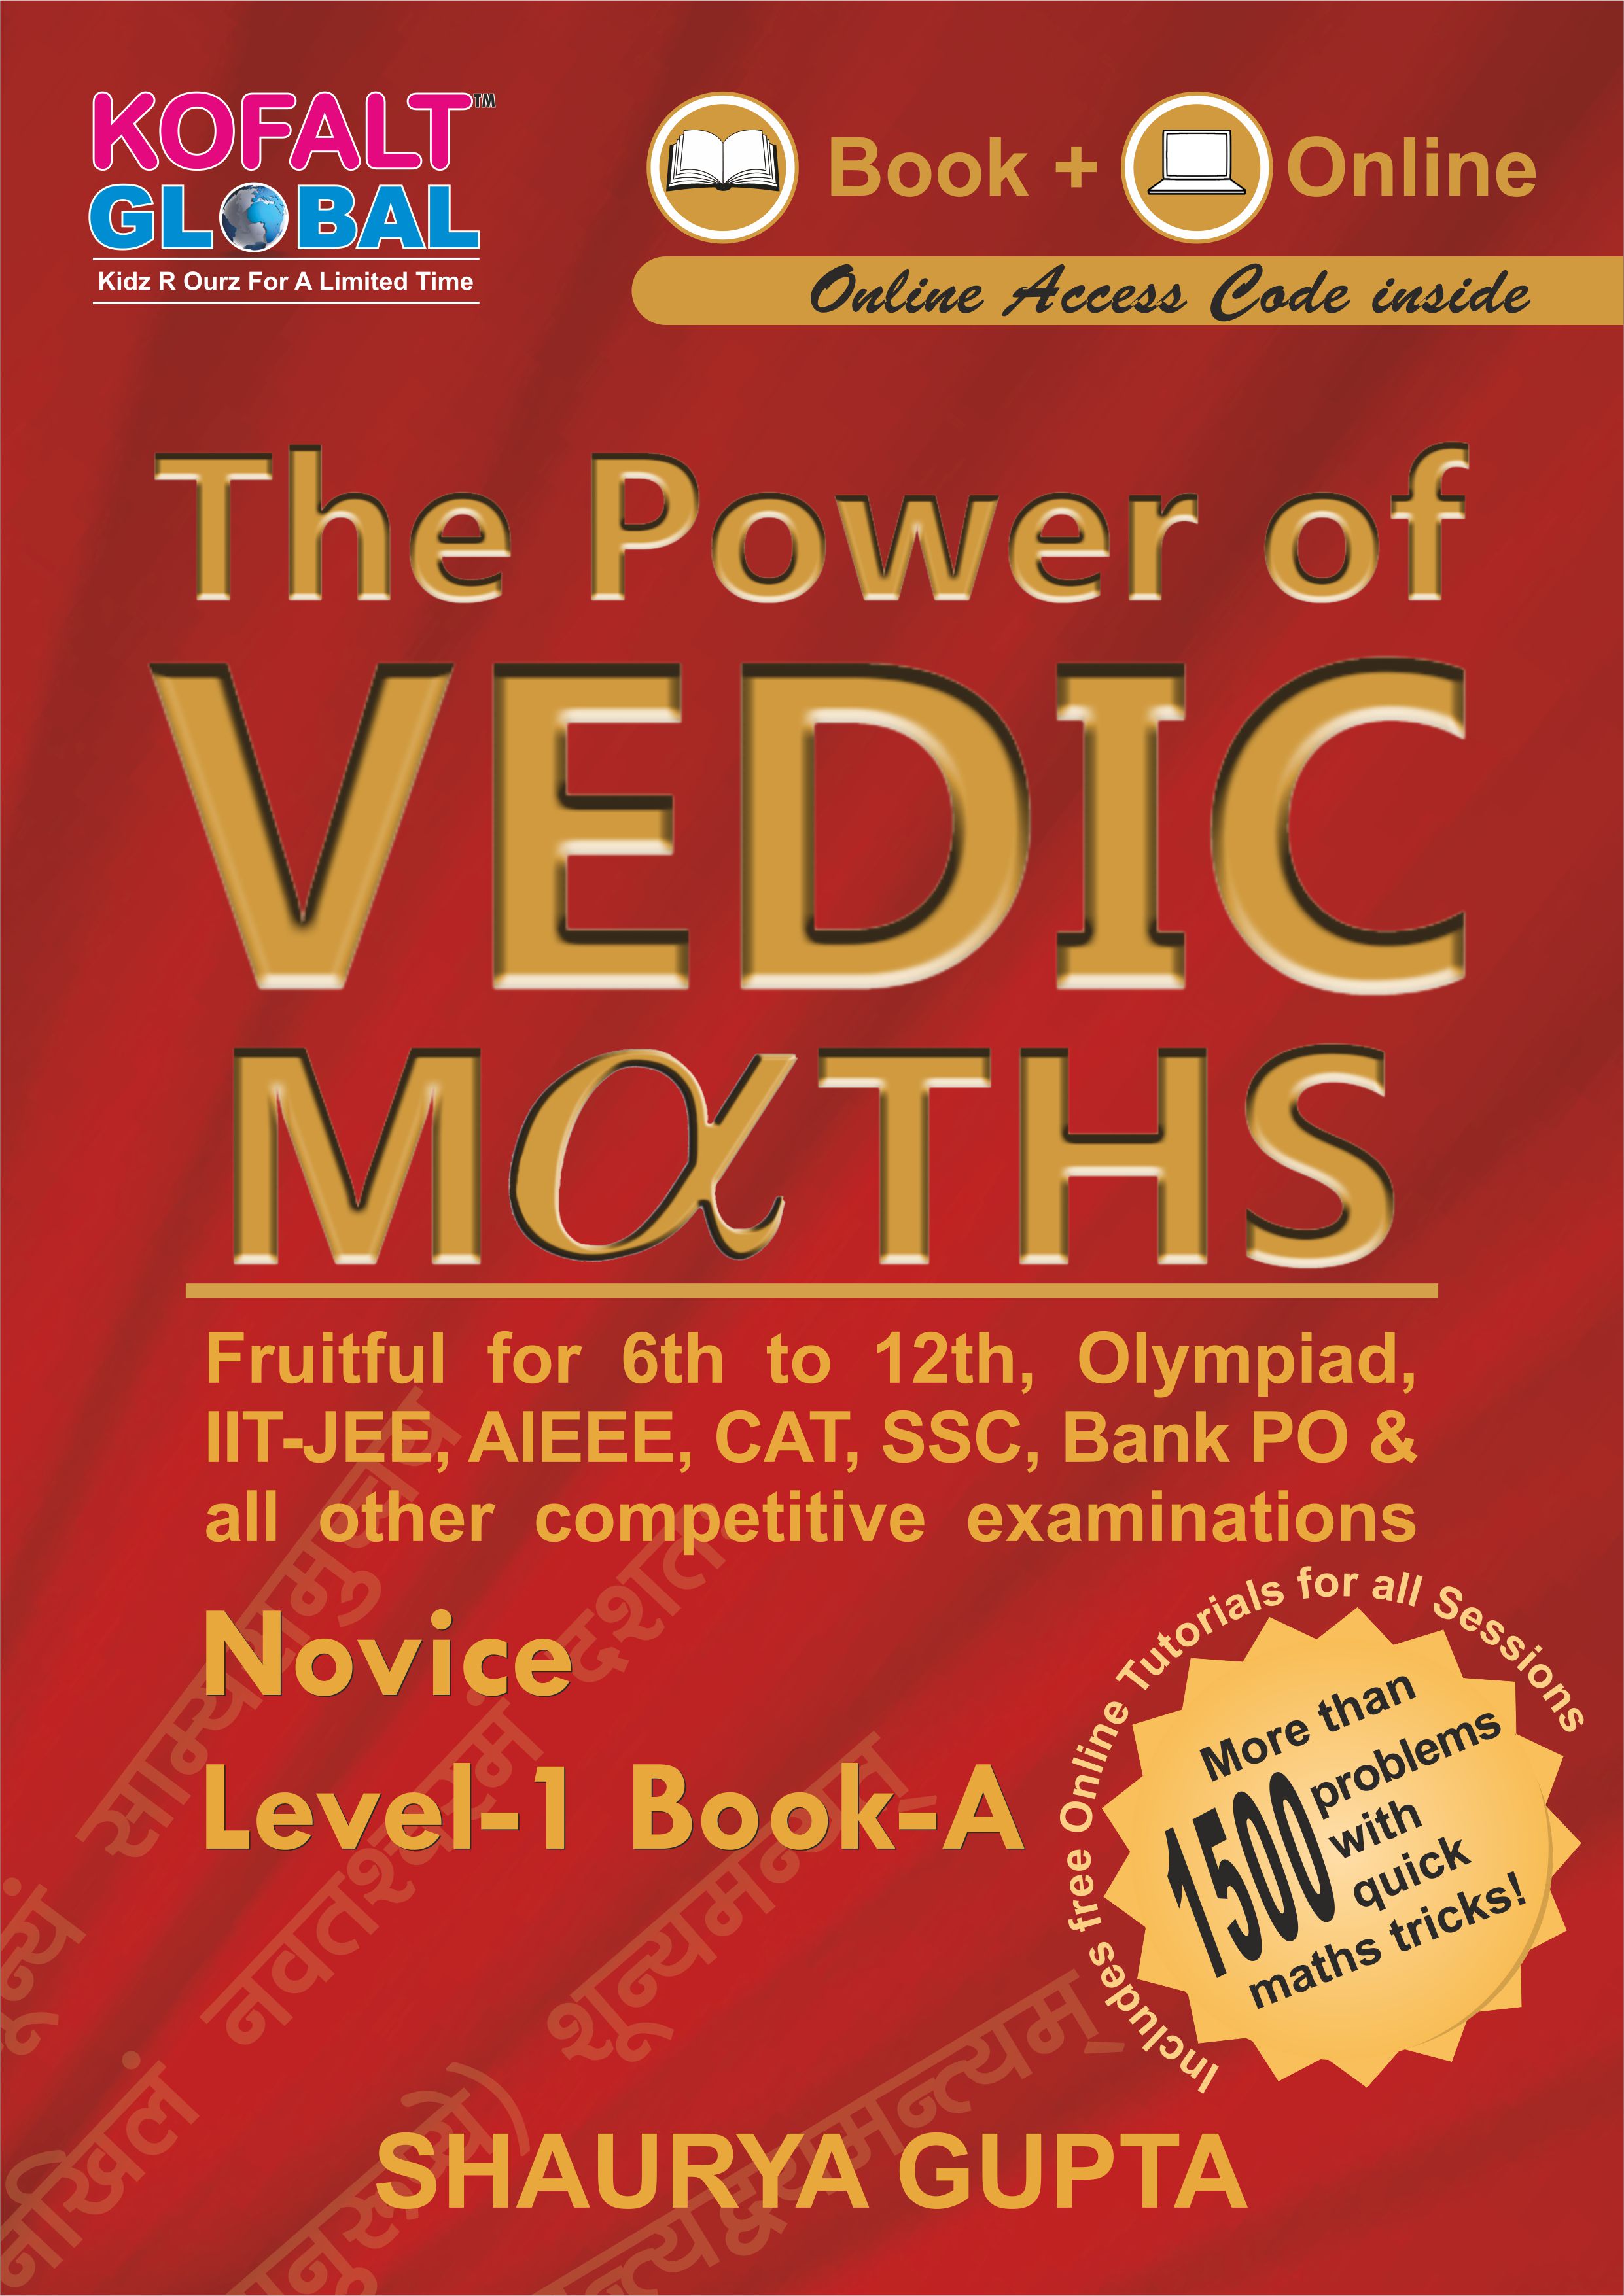 16 sutras of vedic maths with examples pdf